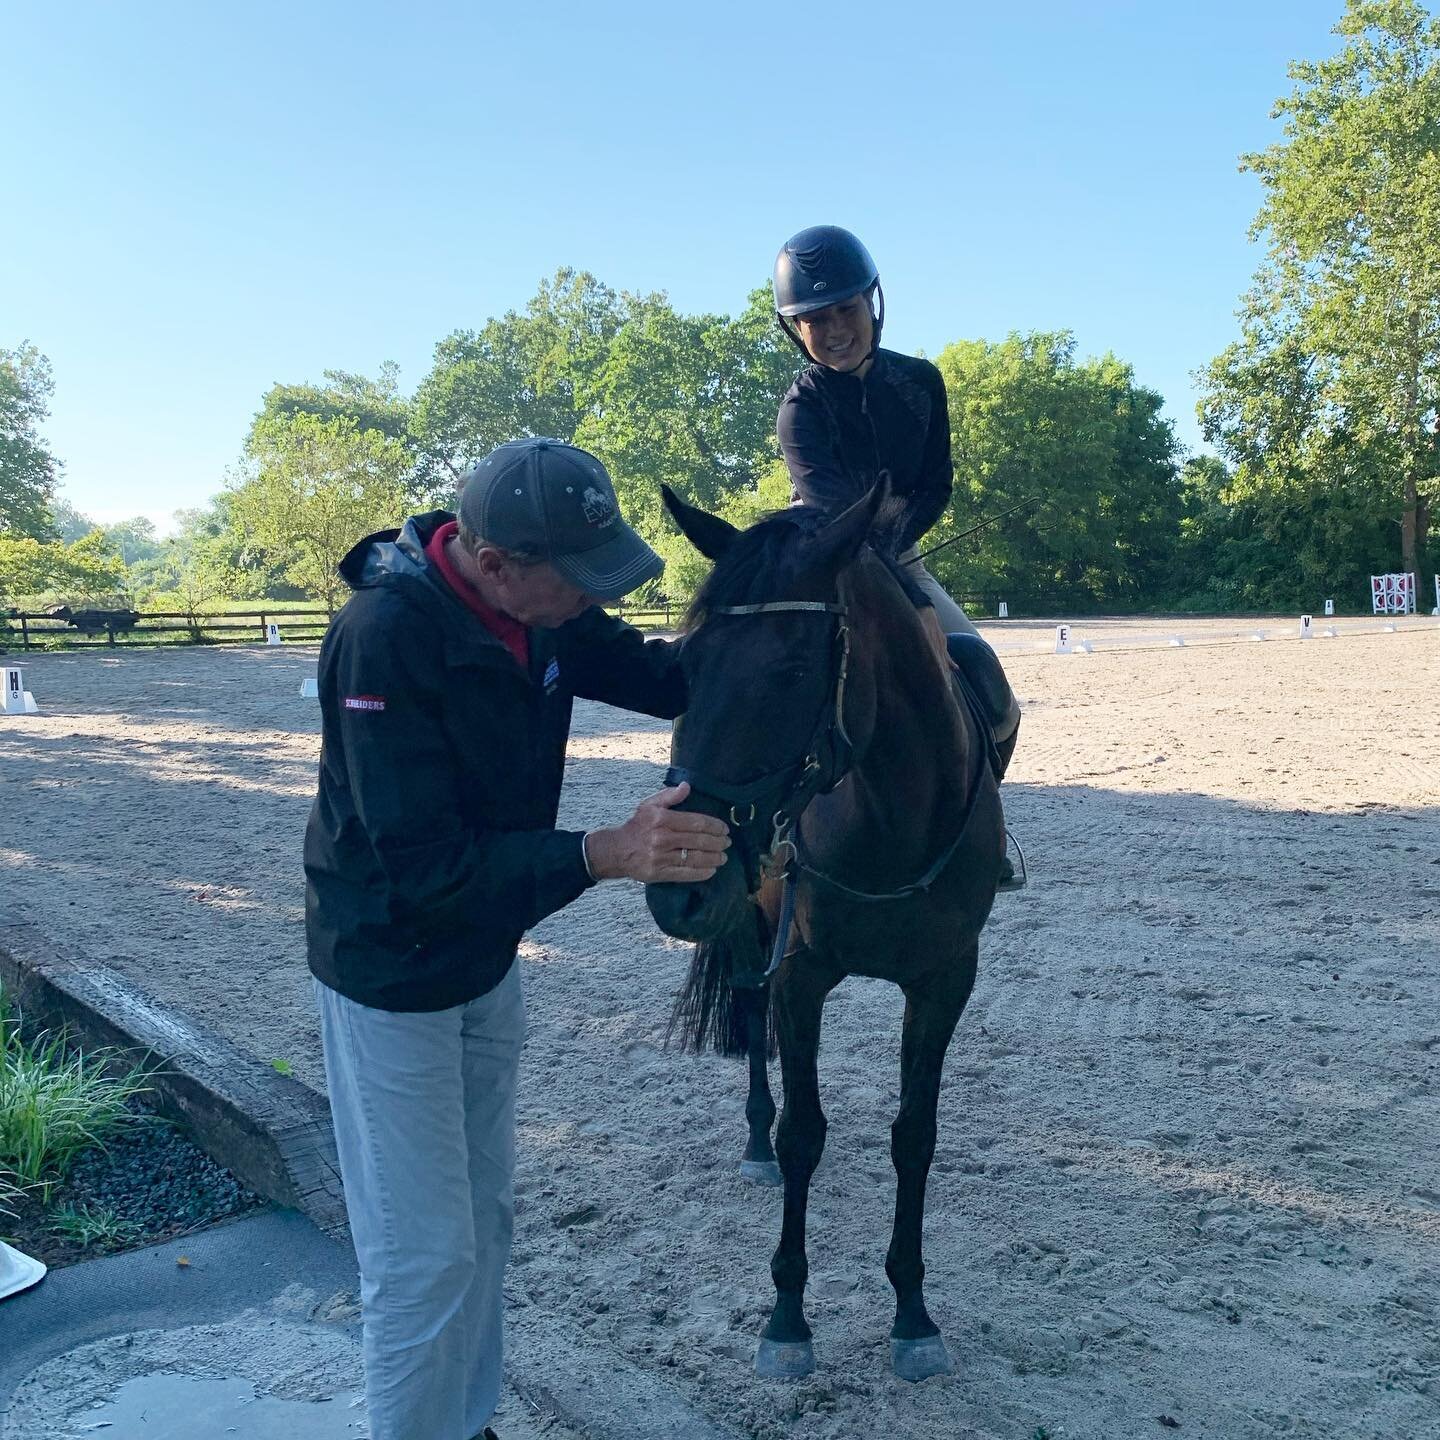 Learned some really fun and helpful dressage exercises from Peter Gray this week! So thankful to ride with him, and on nice horses like Gryff too. Felt a bit like fall this morning, which was nice, but a little bittersweet as it does mean summer is g